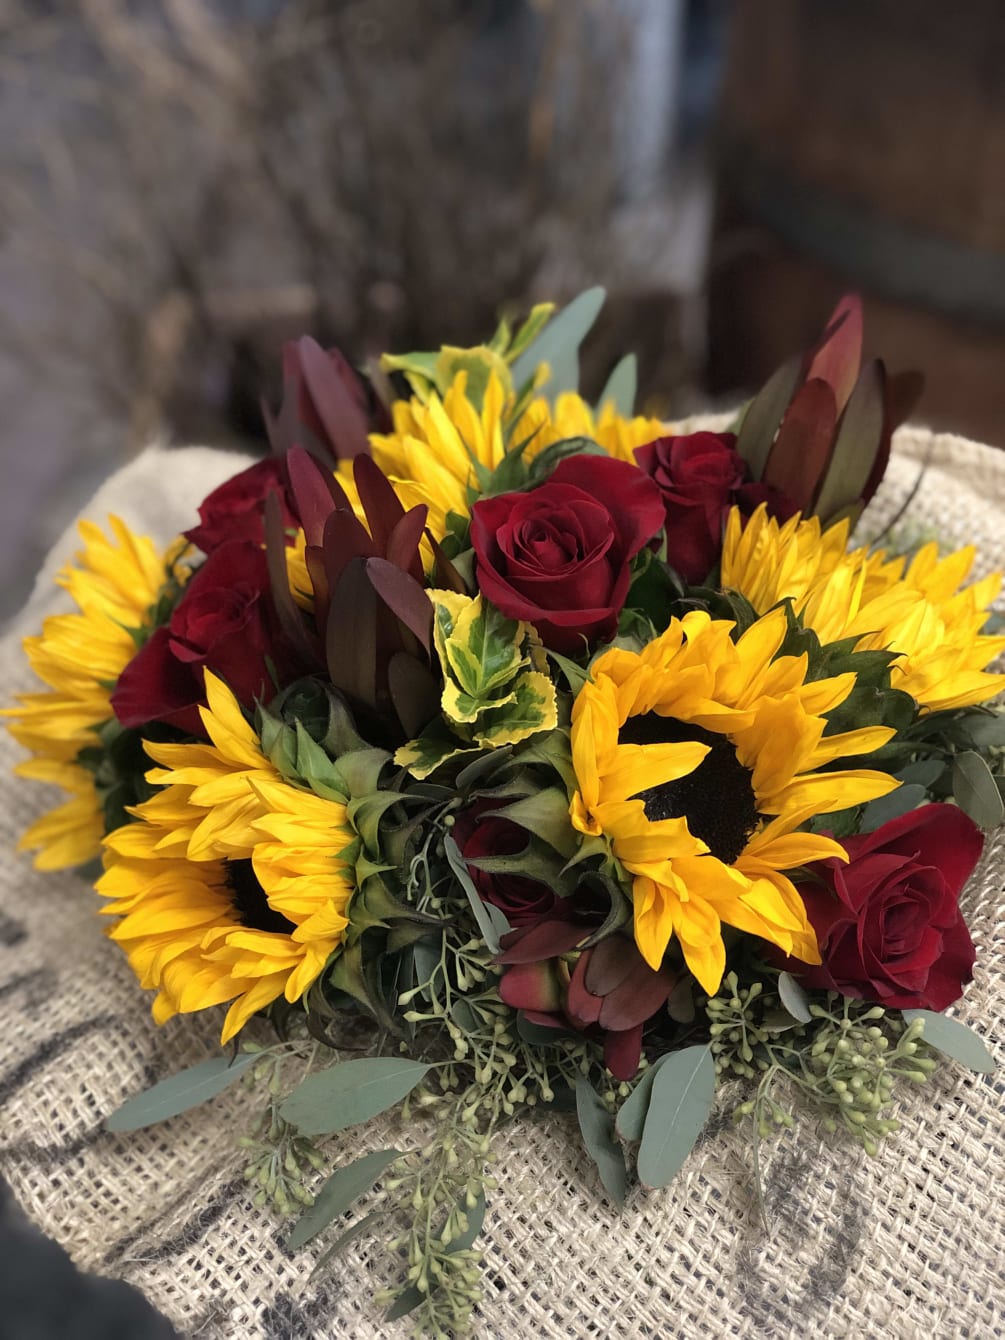 Here is a Gorgeous Hand wrapped mix of 6 bright sunflowers and